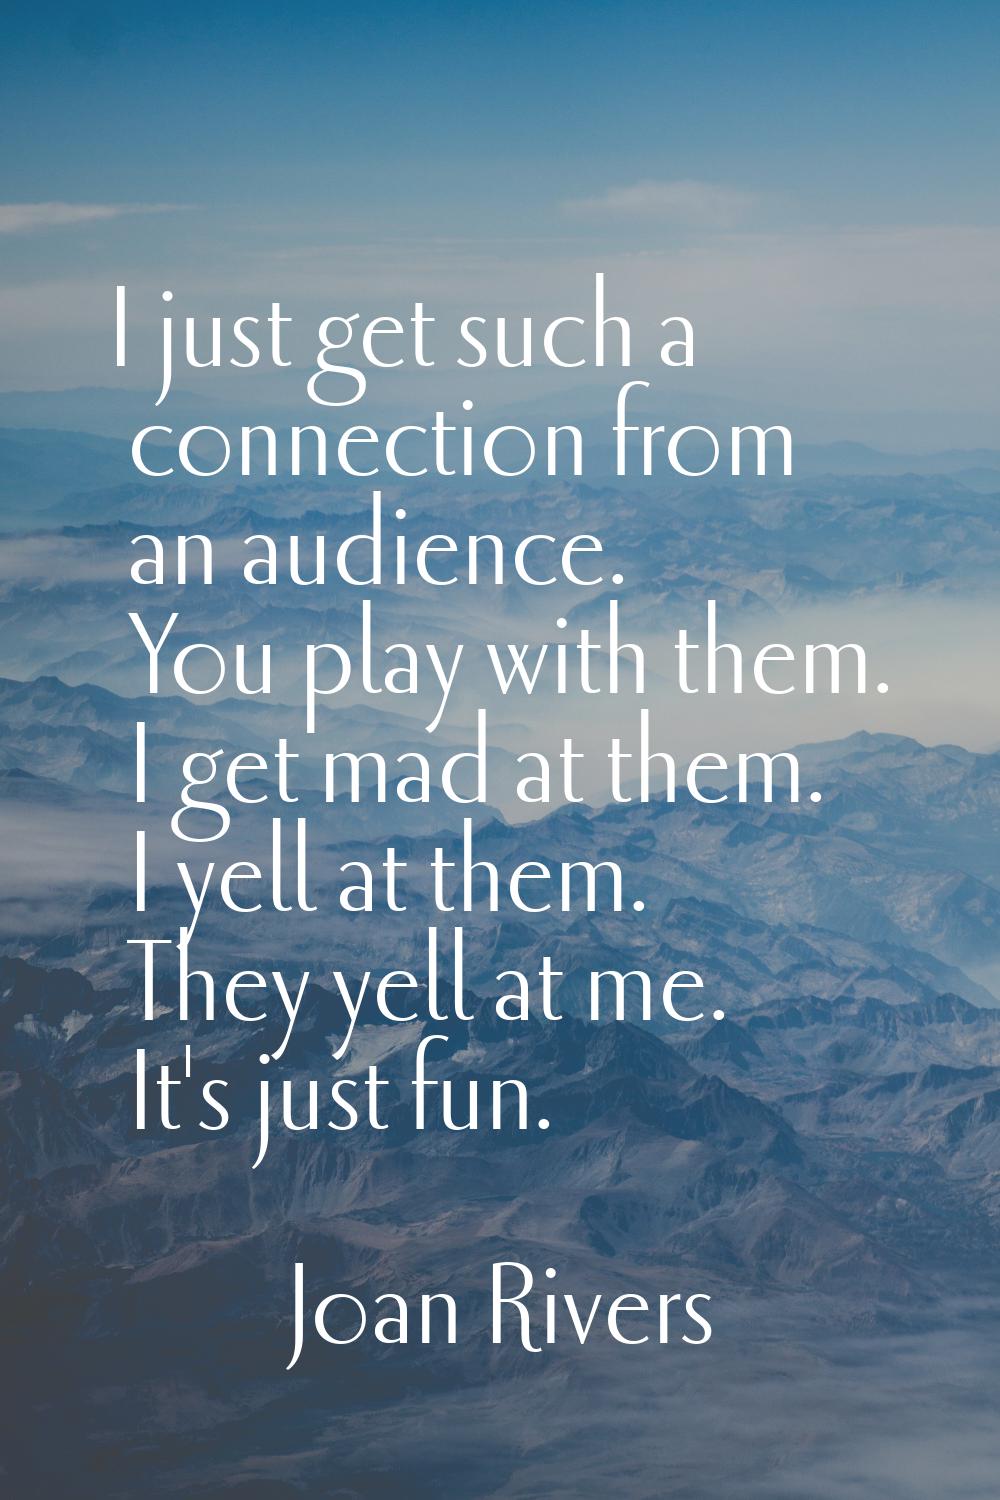 I just get such a connection from an audience. You play with them. I get mad at them. I yell at the